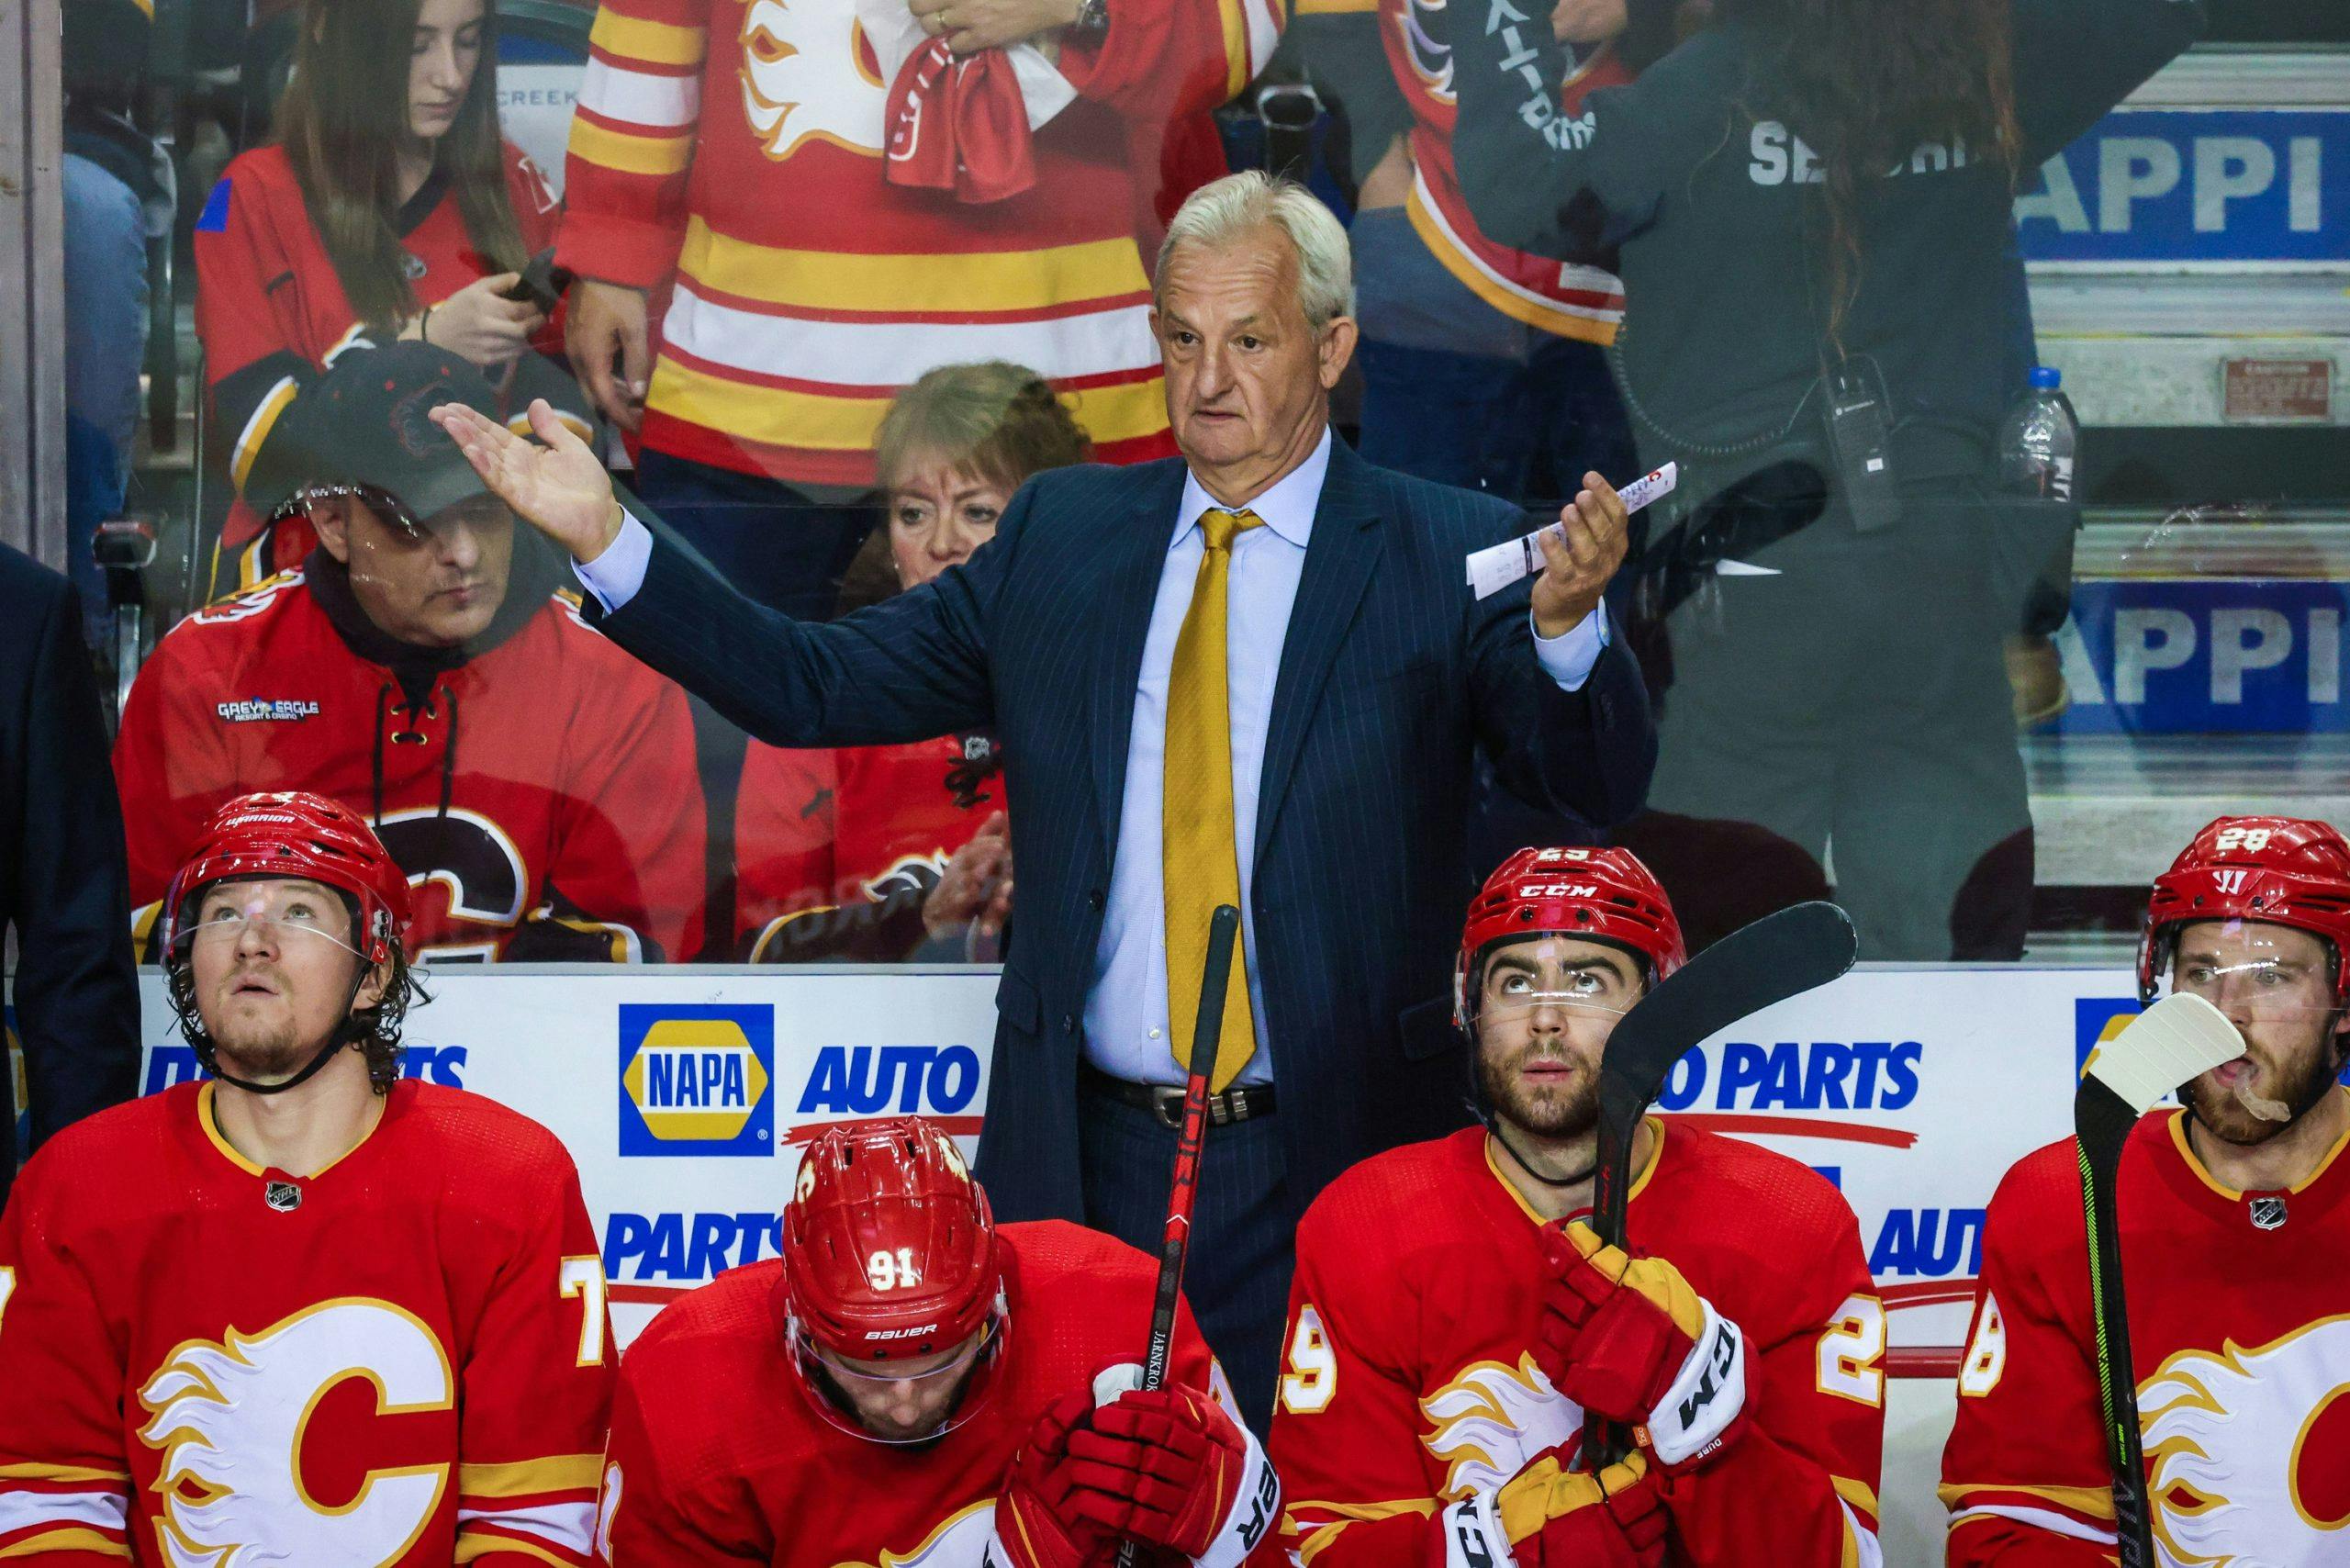 Excitement builds for Flames as playoffs near